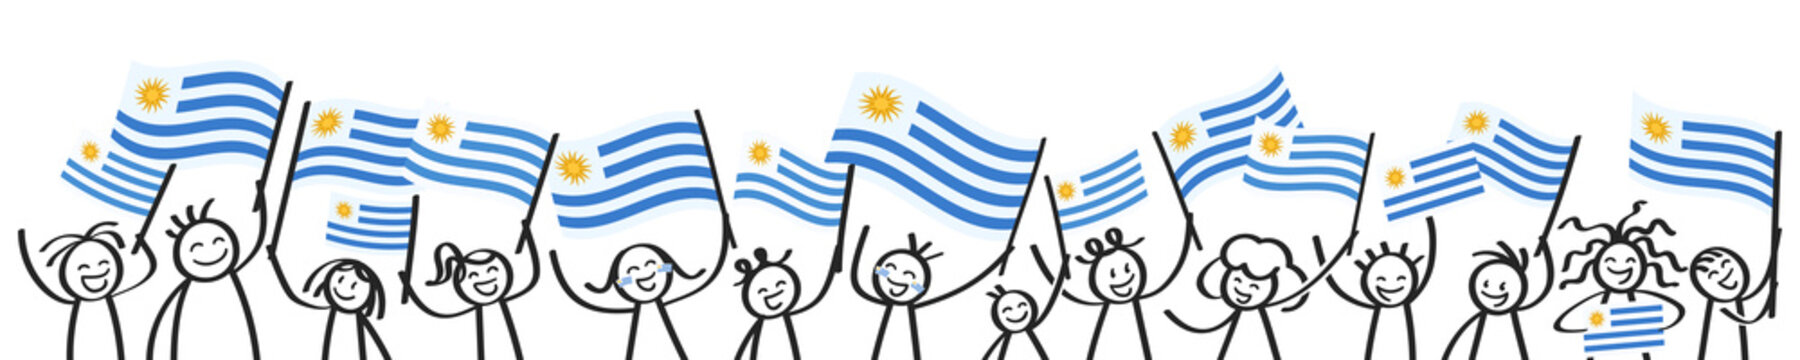 Cheering crowd of happy stick figures with Uruguayan national flags, smiling Uruguay supporters, sports fans isolated on white background